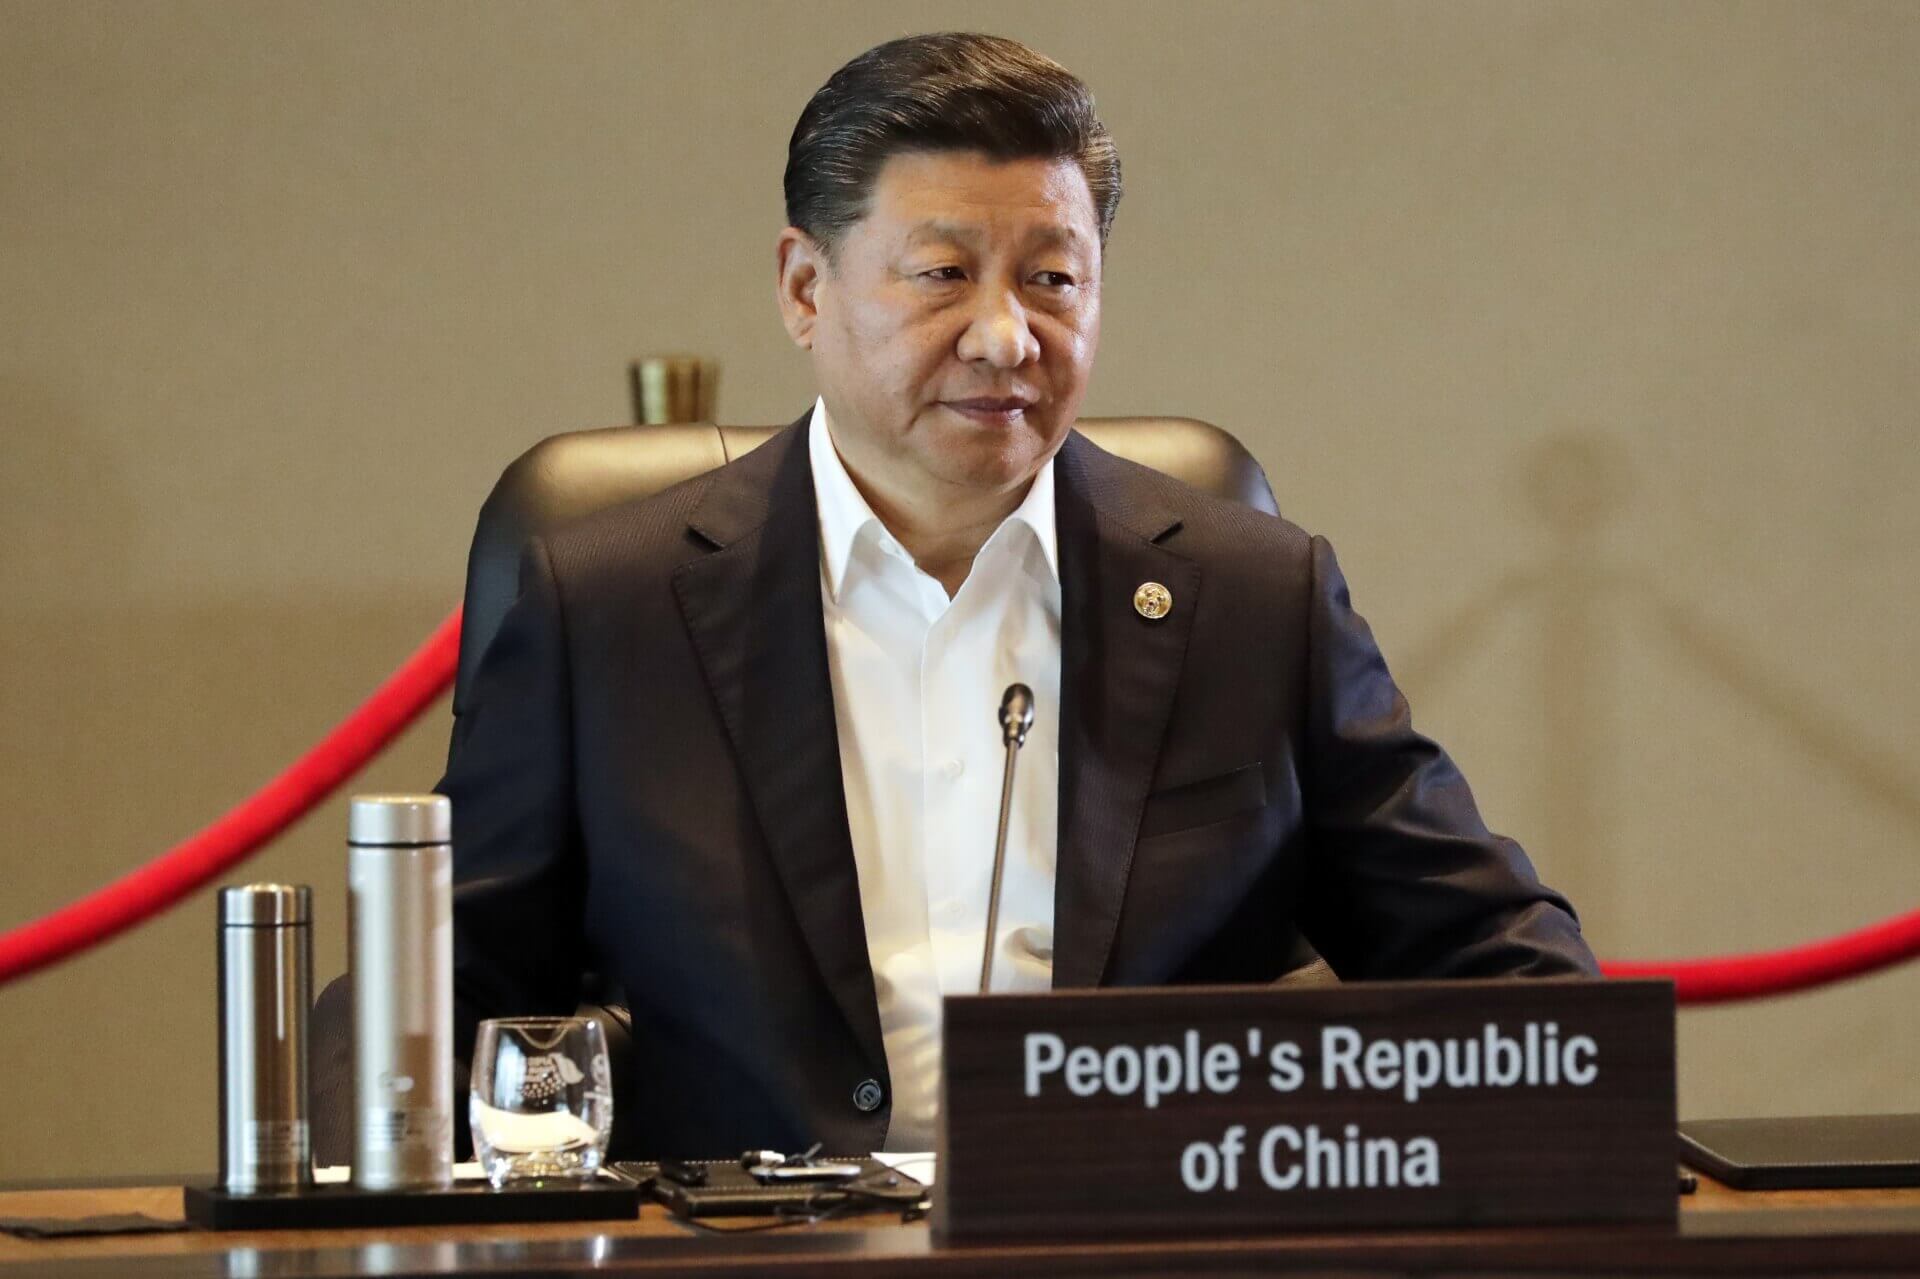 Chinese President Xi Jinping Warns of Cold War-Like Tensions in Asia Pacific